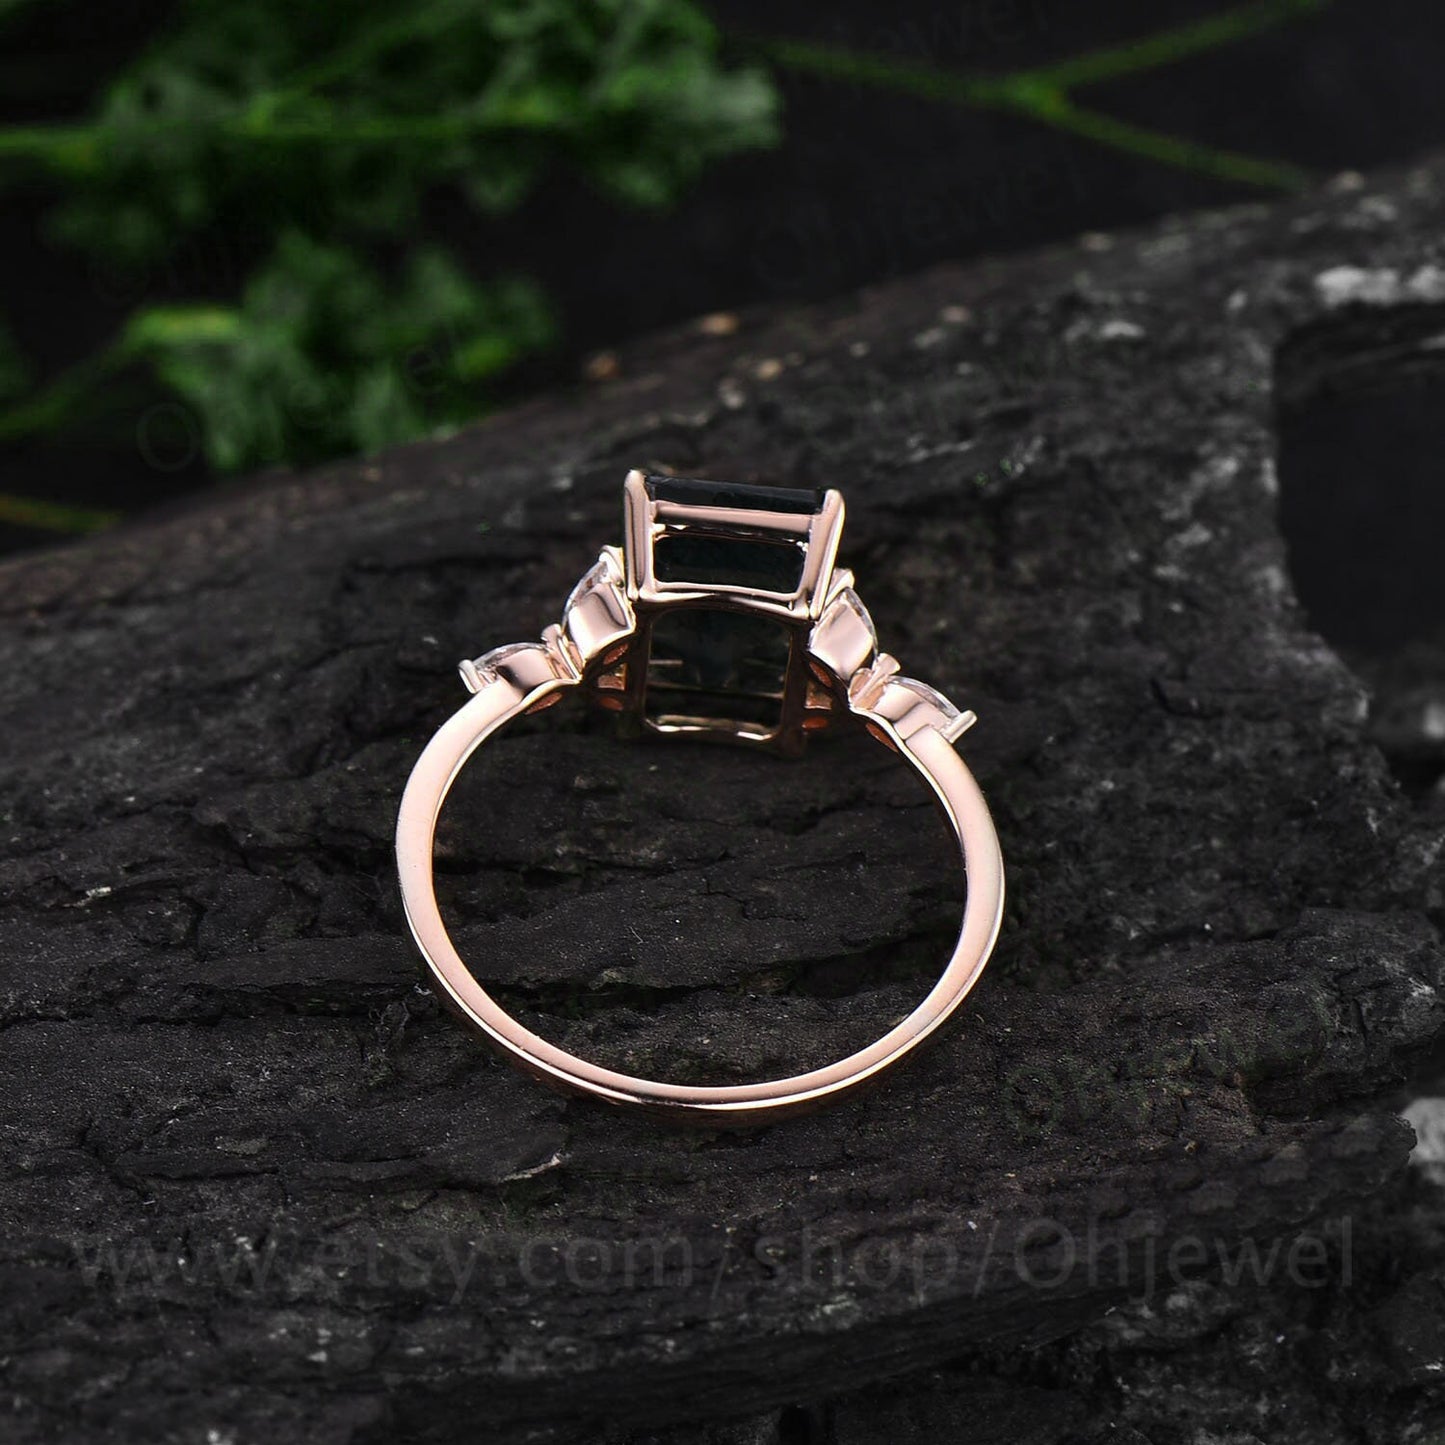 Green moss agate ring vintage moss agate engagement ring rose gold flower unique emerald cut engagement ring art deco moissanite bridal ring